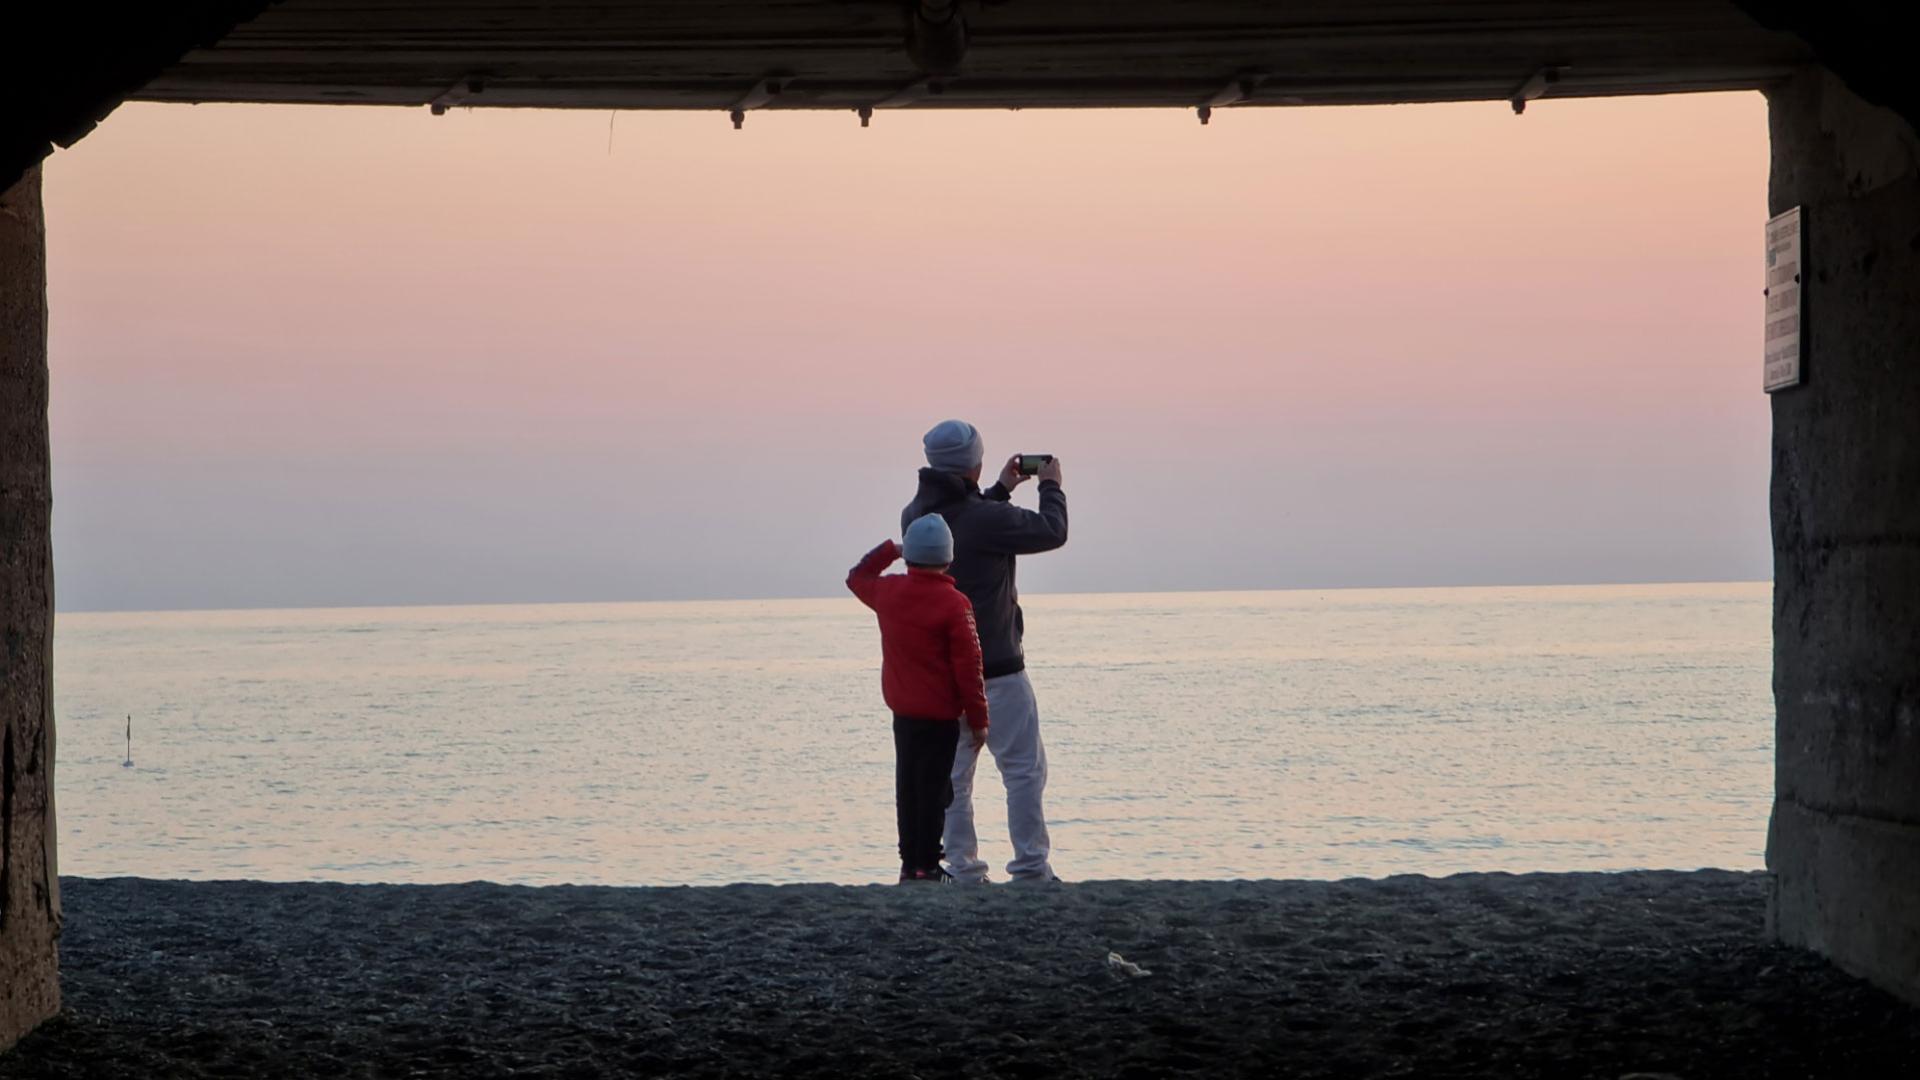 Two people admire the sunset on the beach, taking a photo.